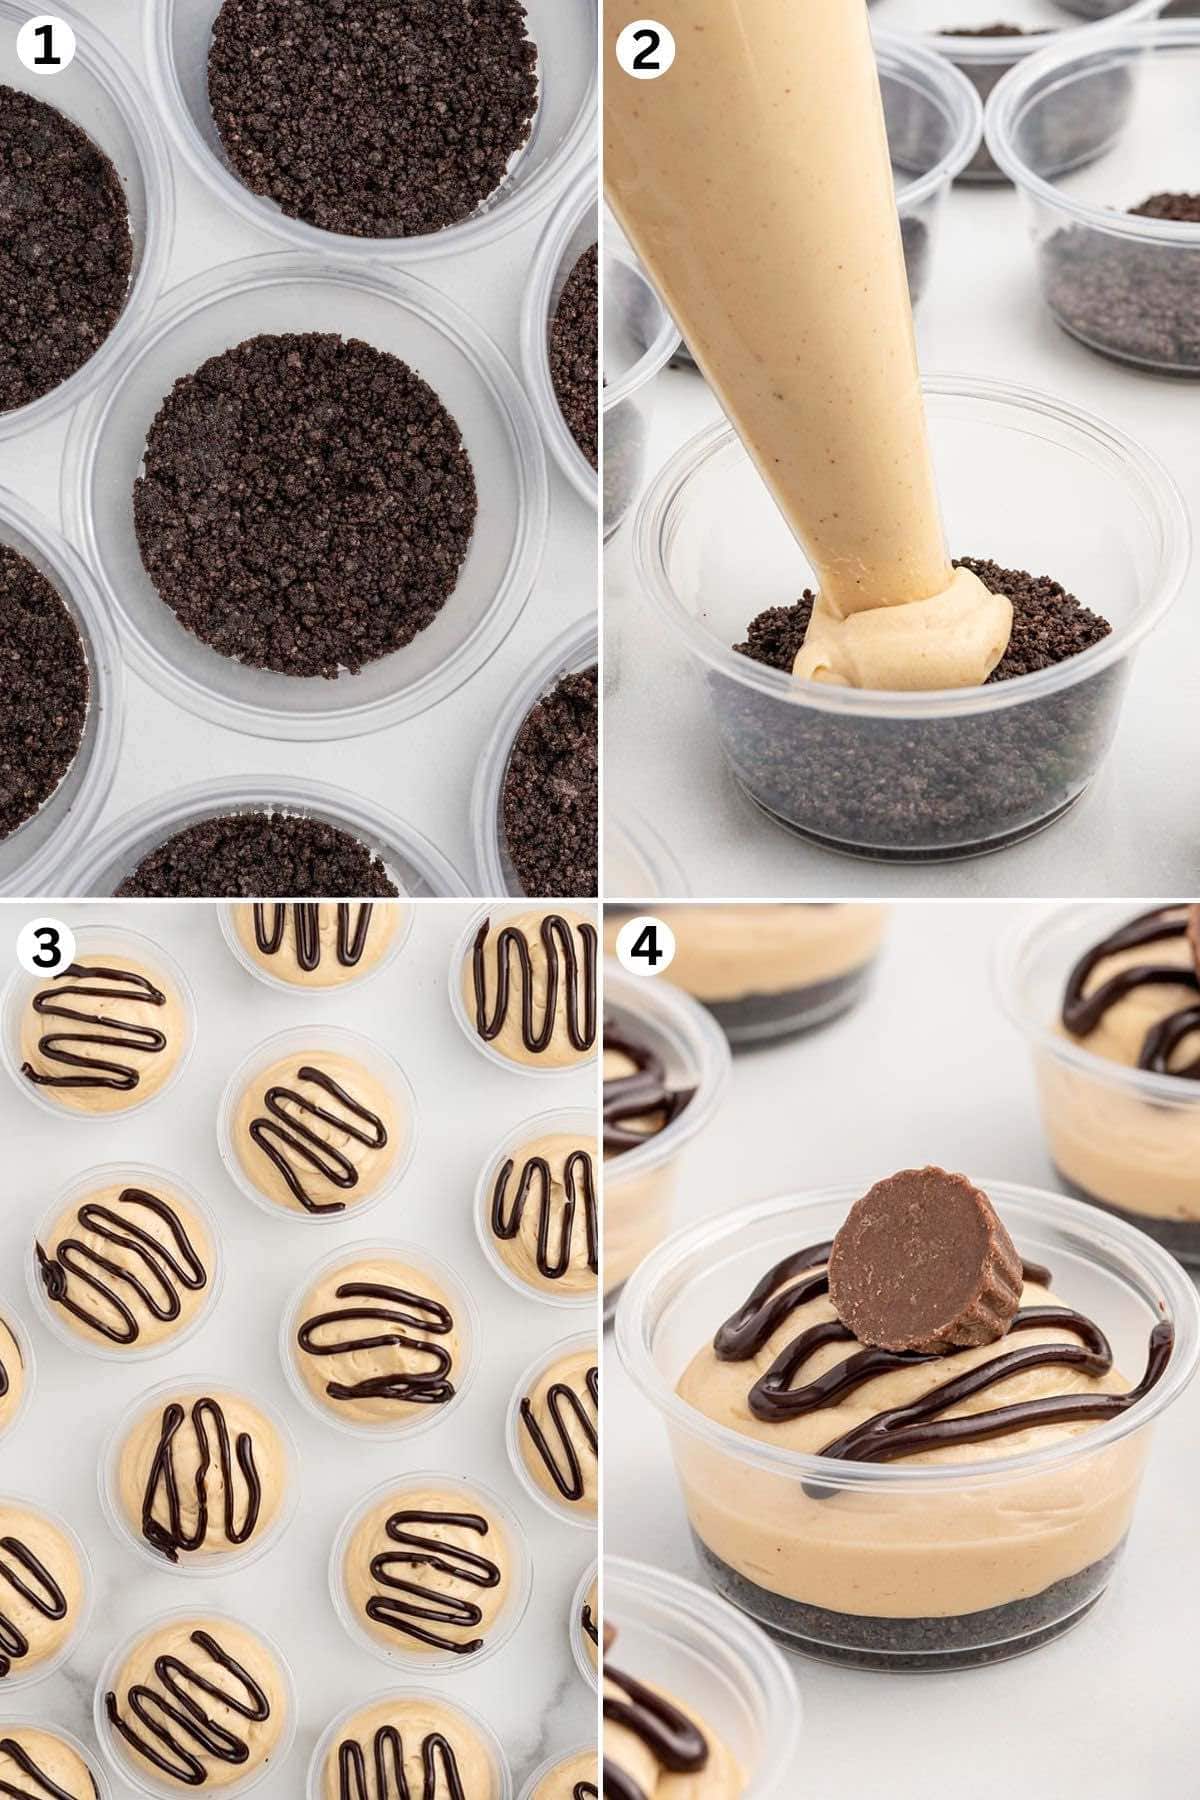 Crusted oreos mixture at the bottom of the cups. Pipe the peanut butter filling on top of the cookie crumbs. Drizzle with chocolate sauce and top with a mini peanut butter cup.